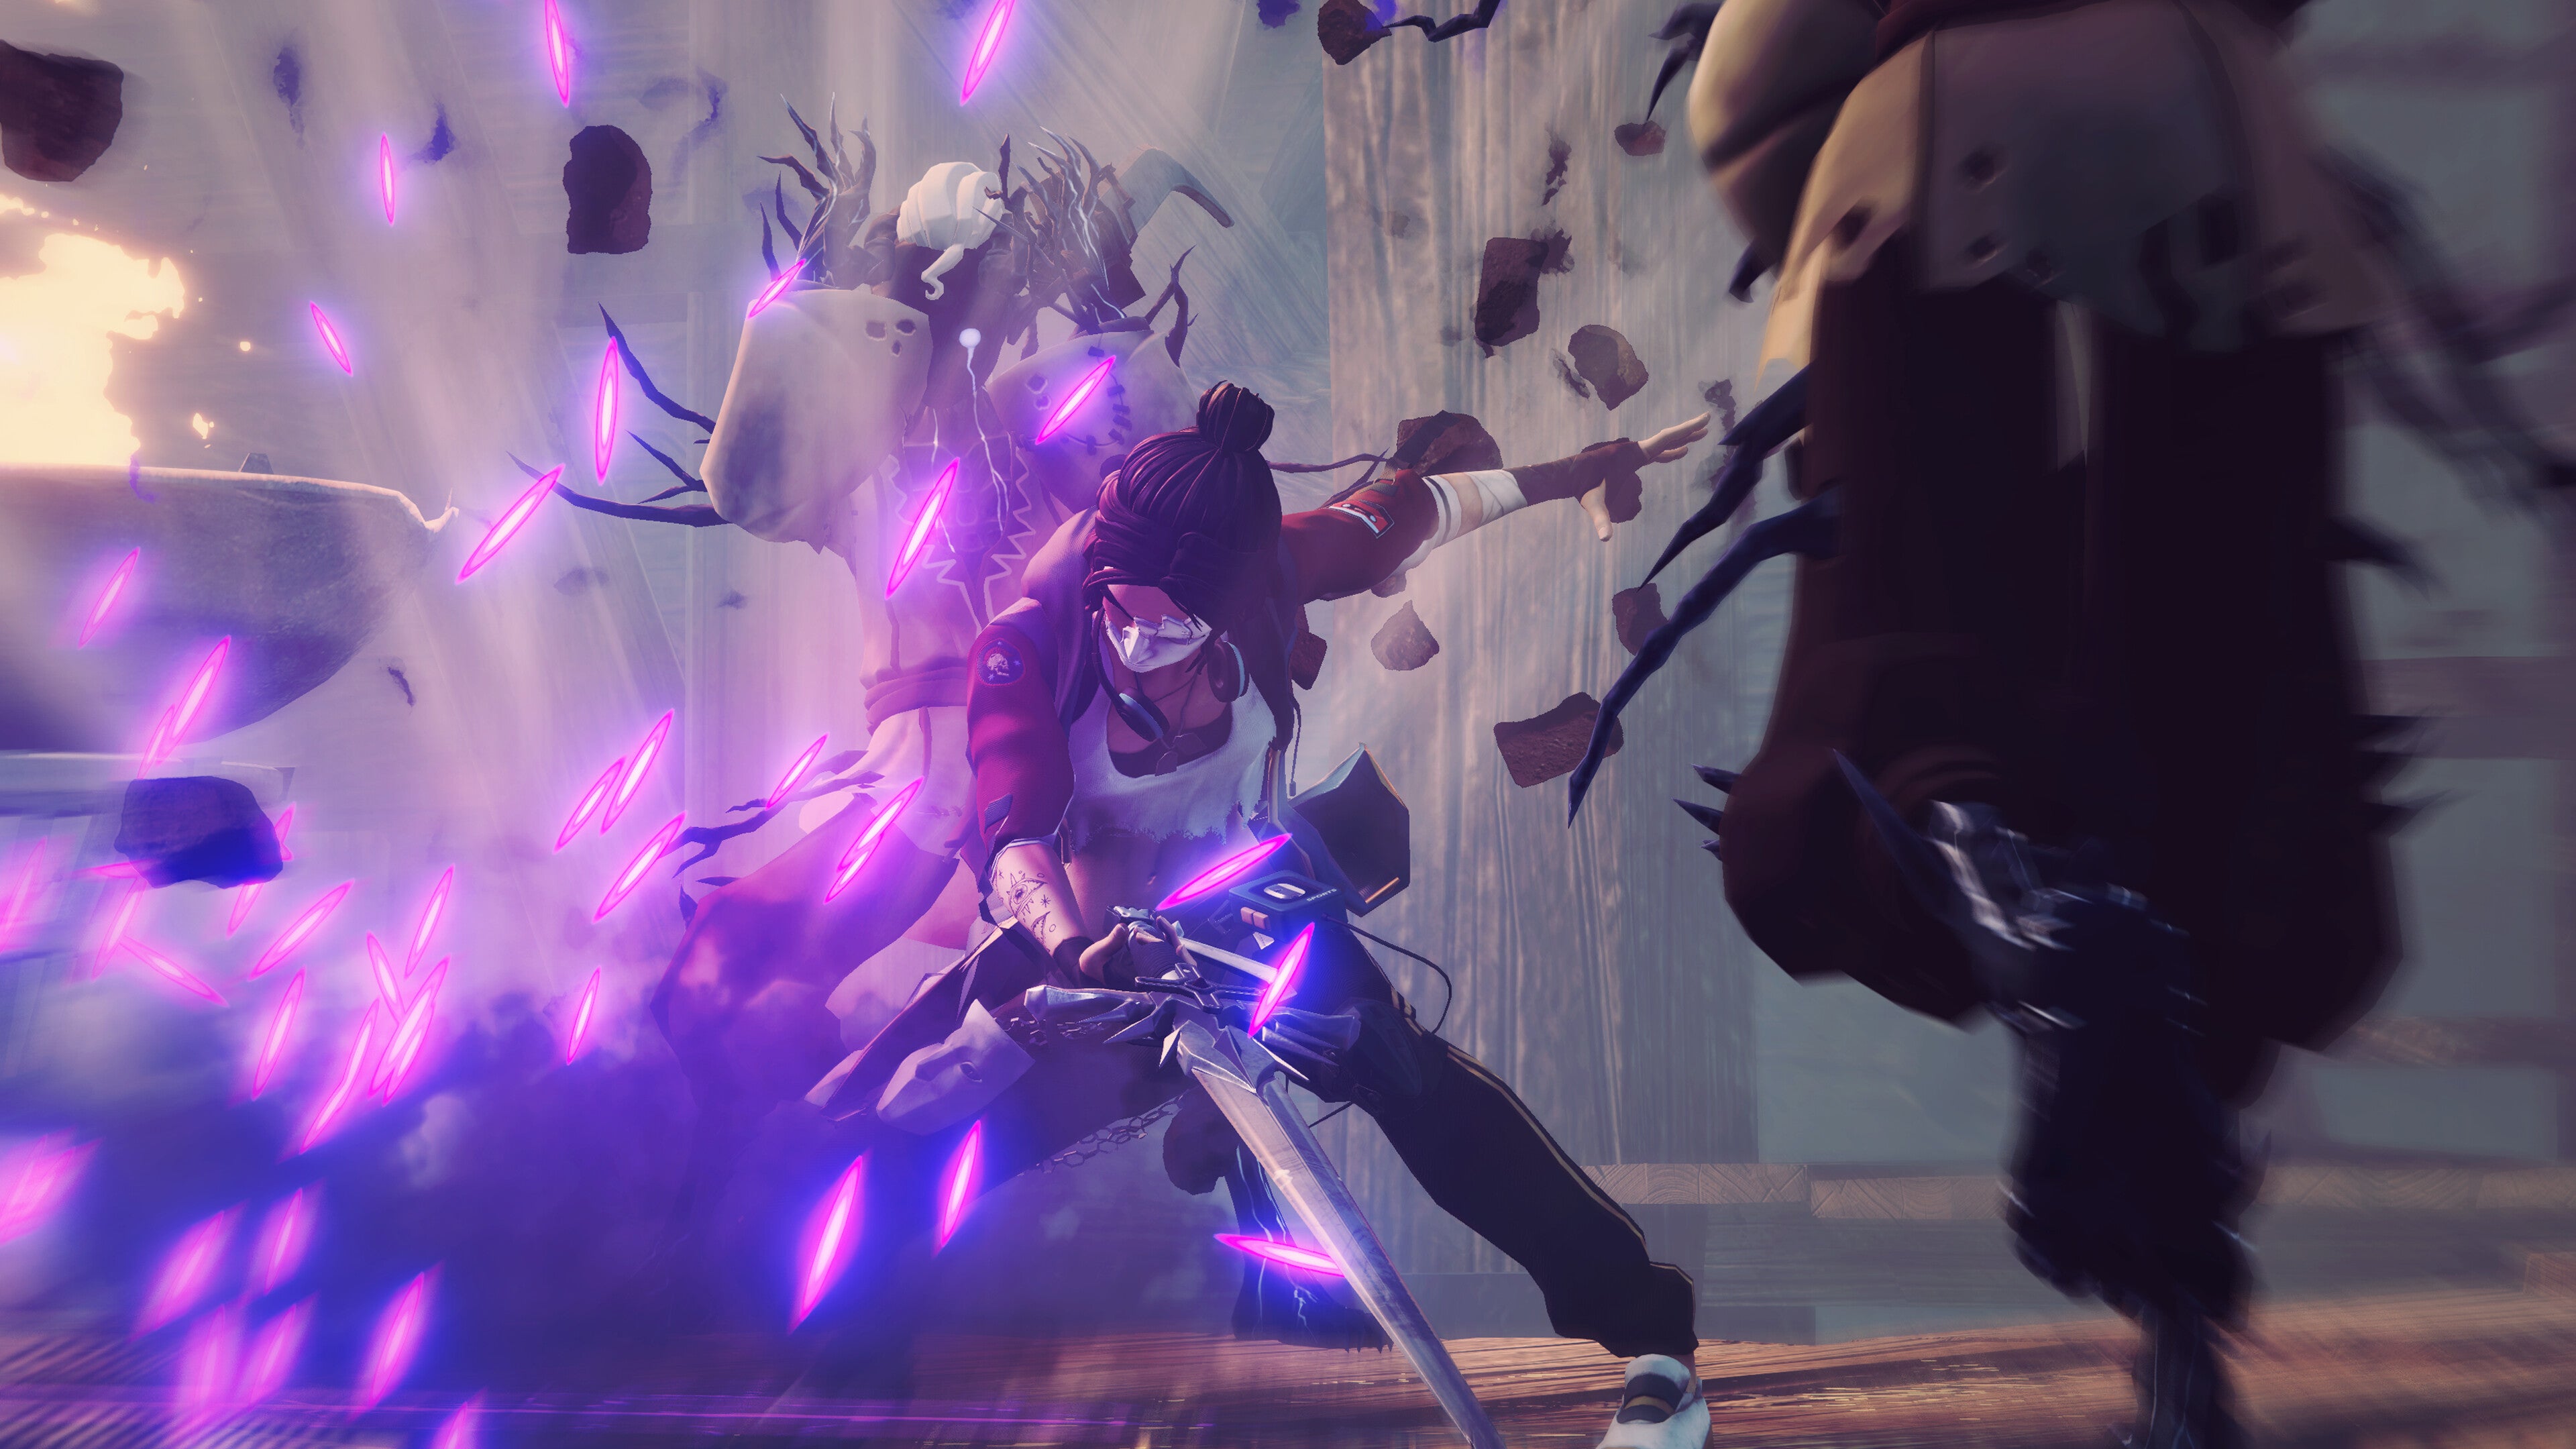 The protagonist of Phantom Hellcat slashes at odd bipedal enemies with her sword, causing purple sparks to fly.